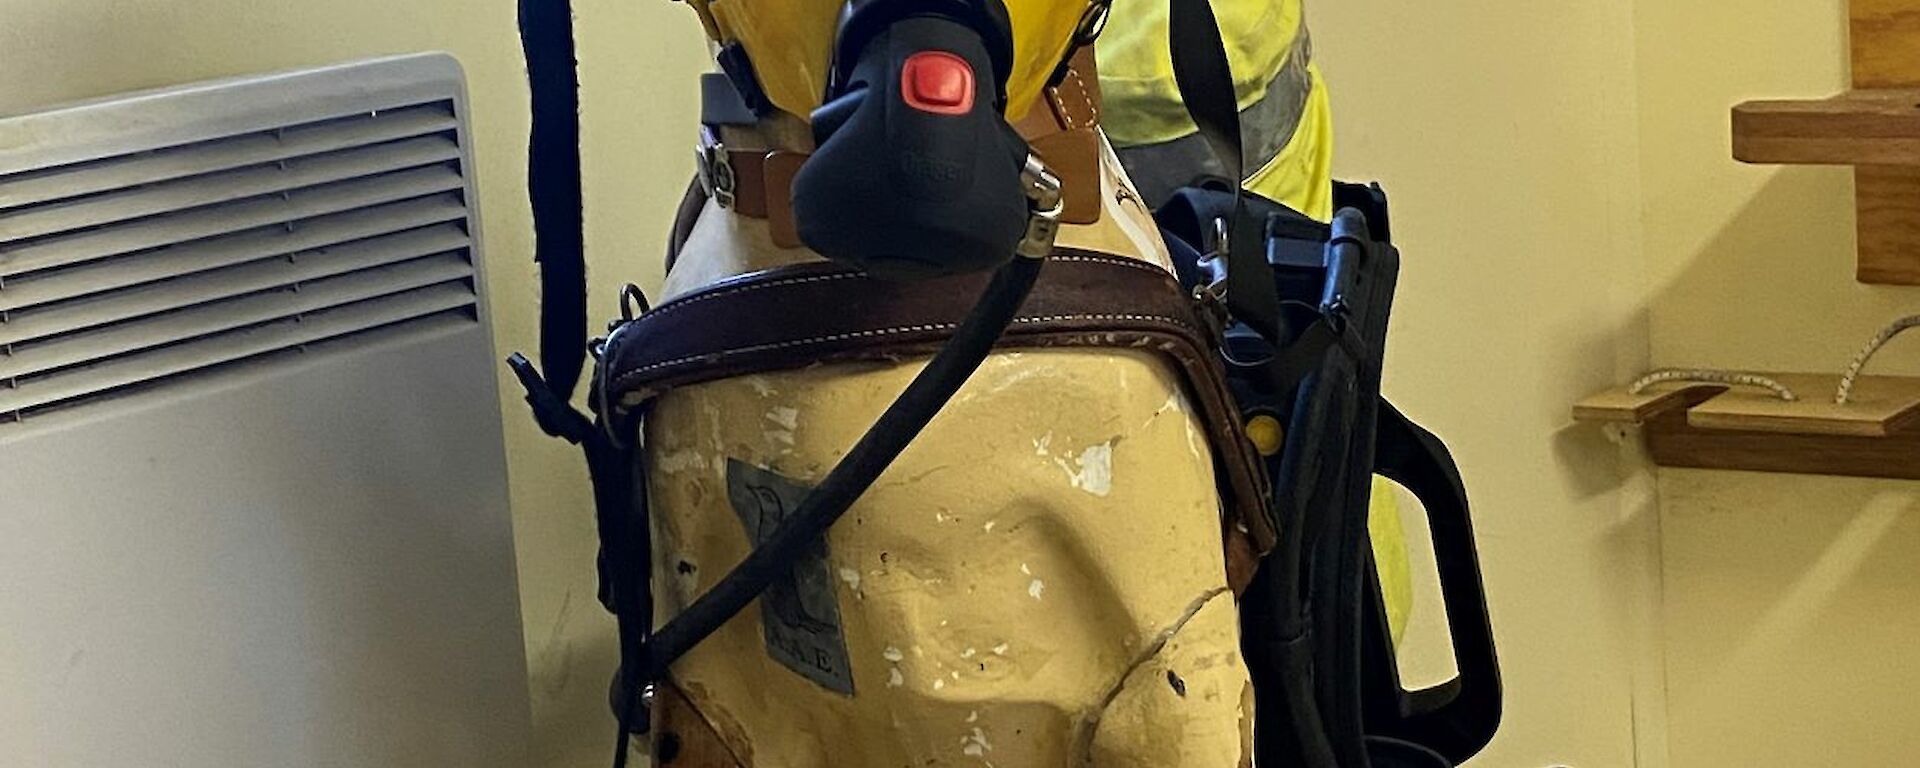 A plastic guide dog is dressed in fire fighting gear